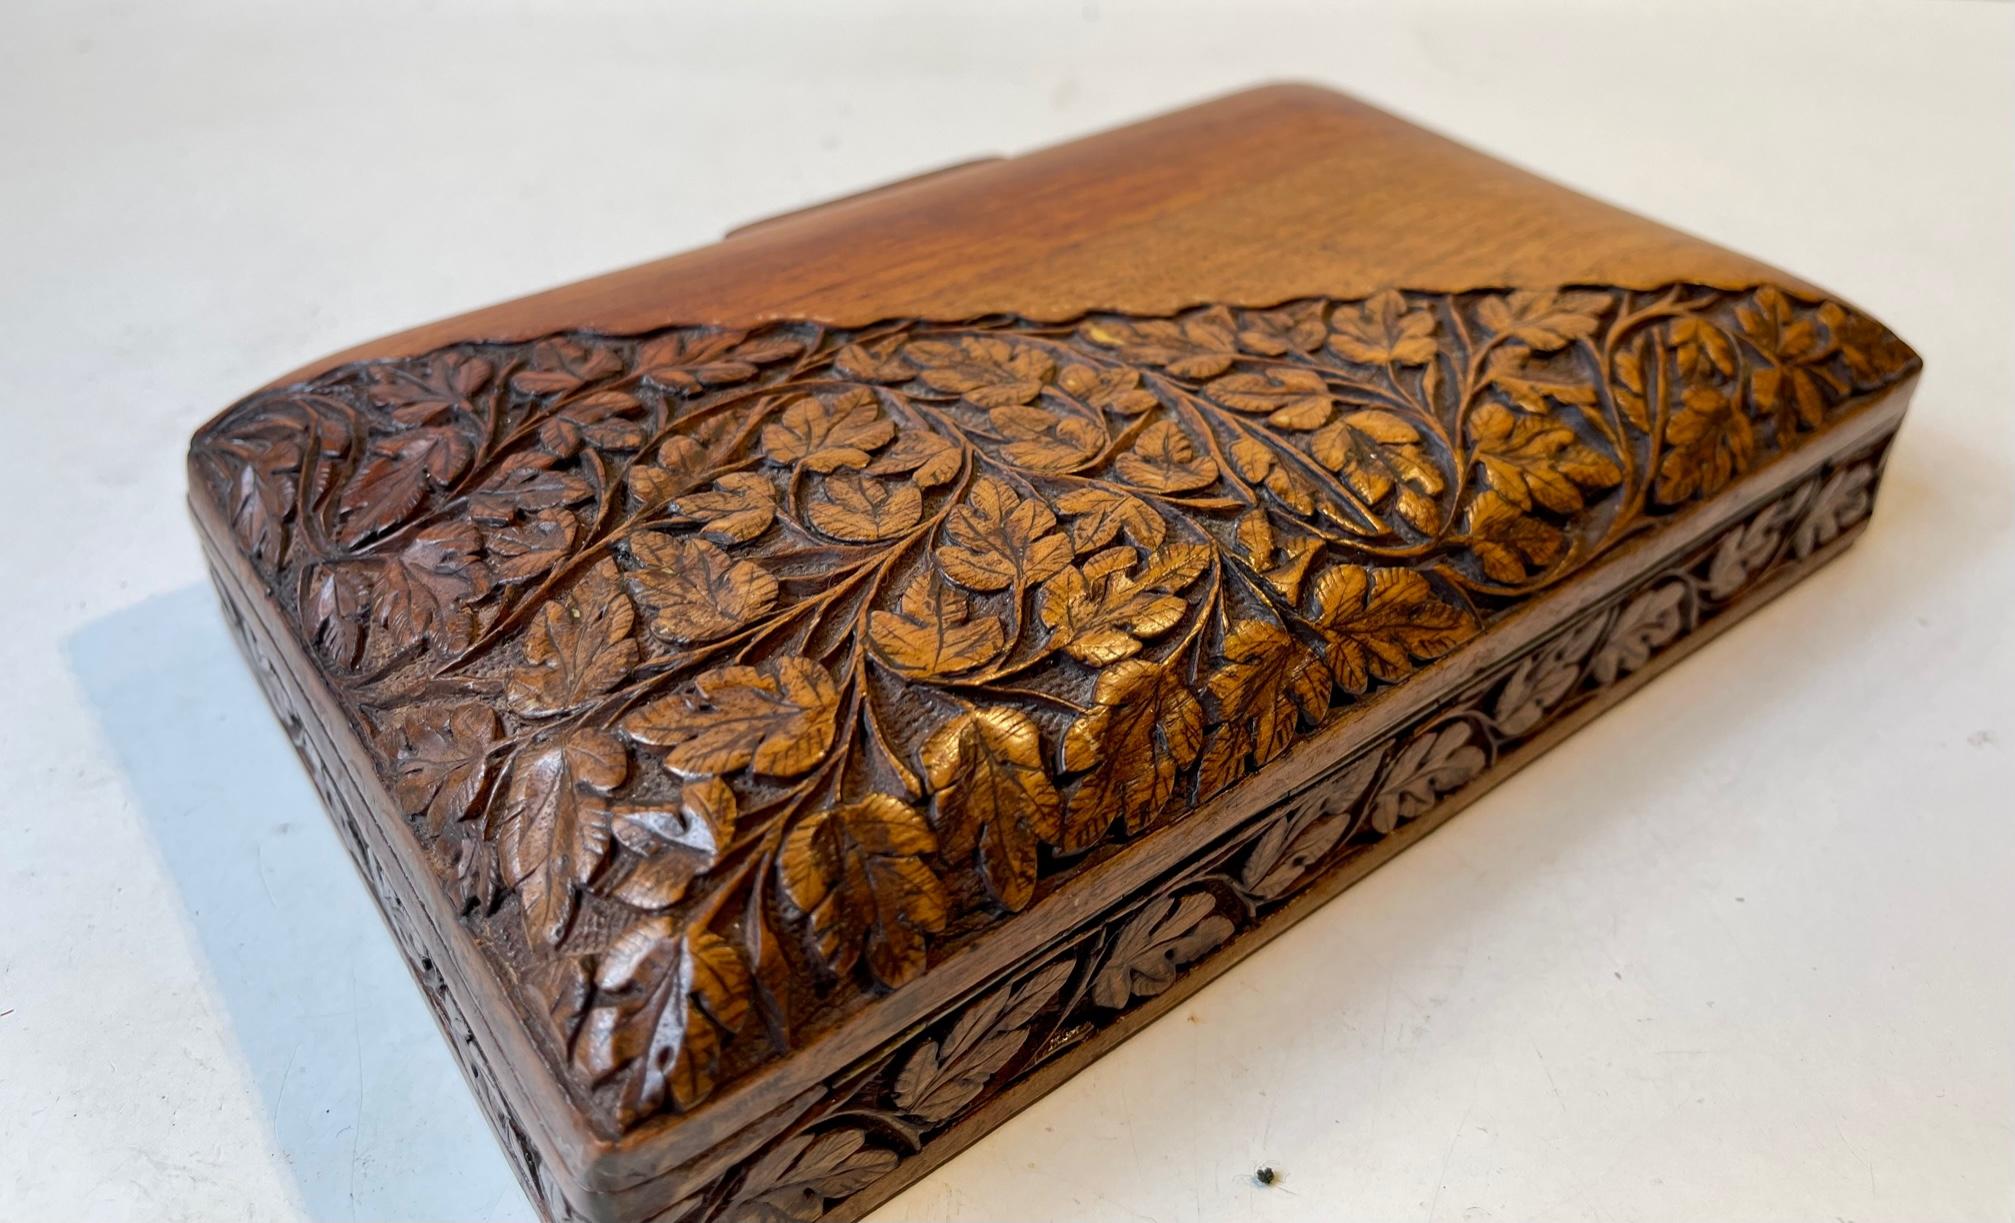 Decorative oak box intricately decorated with oak leaves in relief to one half. Artisan made in Scandinavia during the 1920s. Suitable for tobacco, jewelry or playing cards. Measurements: 20x12.5x5 cm.